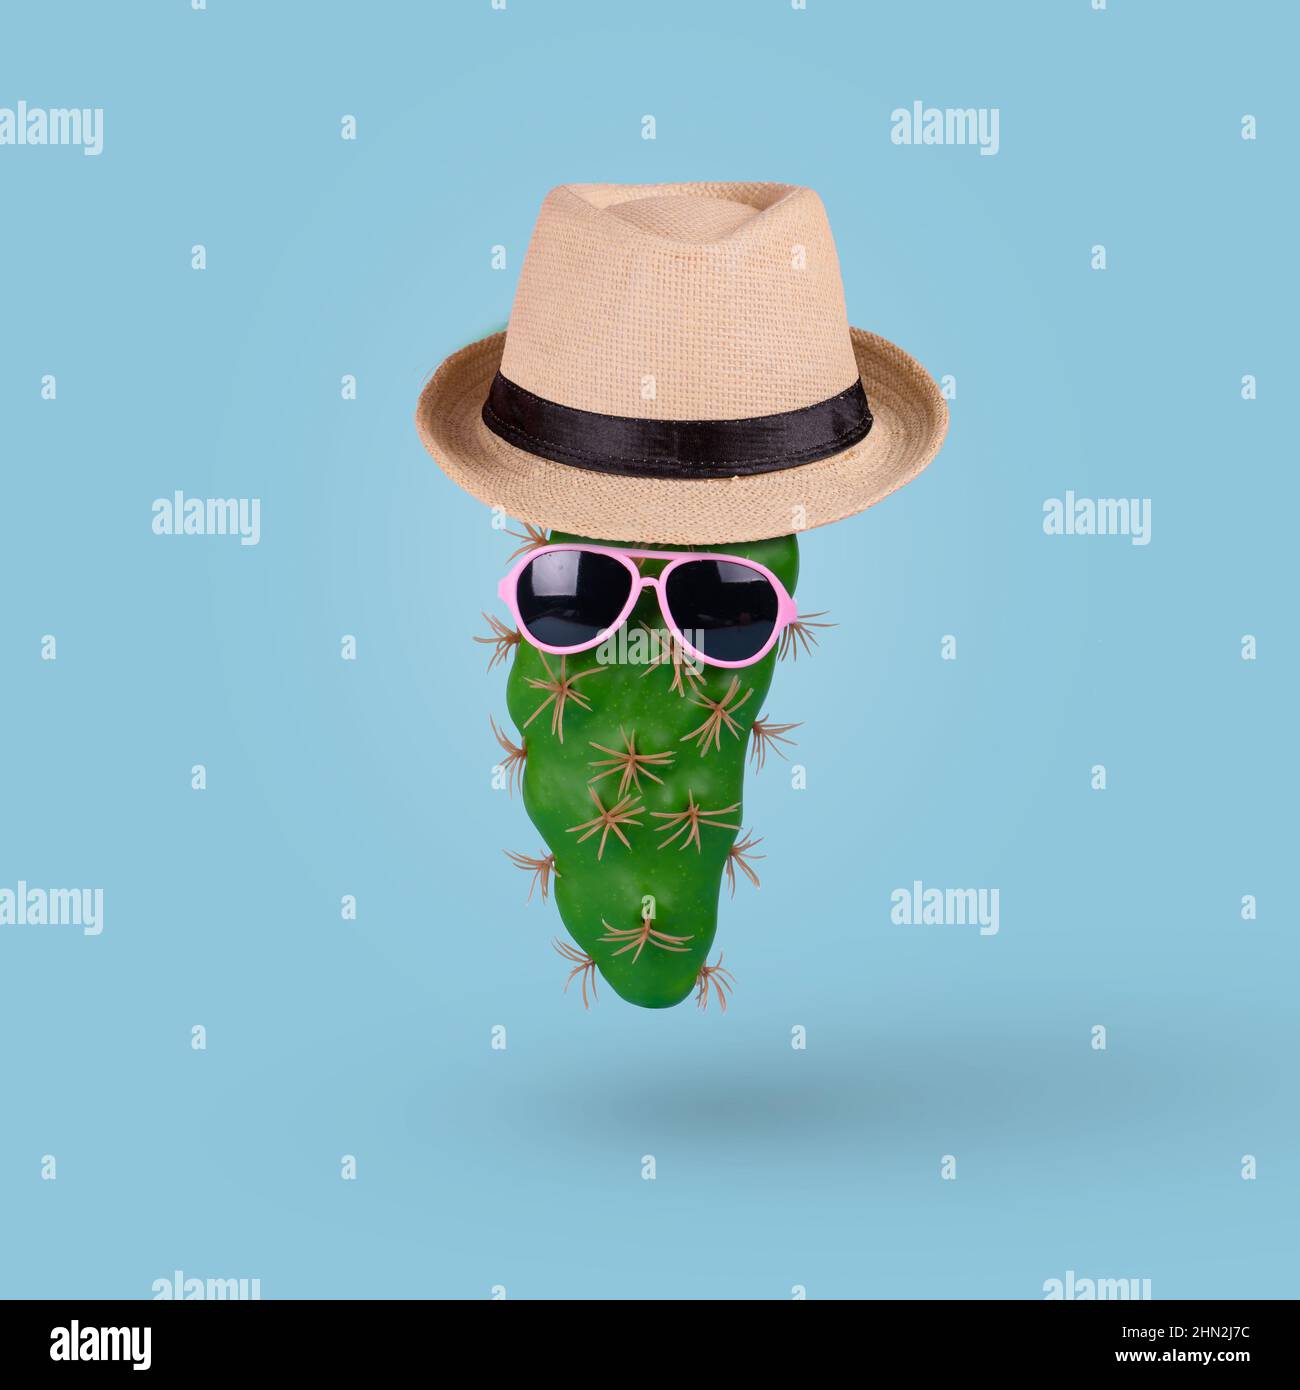 Green cactus in trendy sunglasses wearing hat on a blue background. Minimal Summer concept. Stock Photo